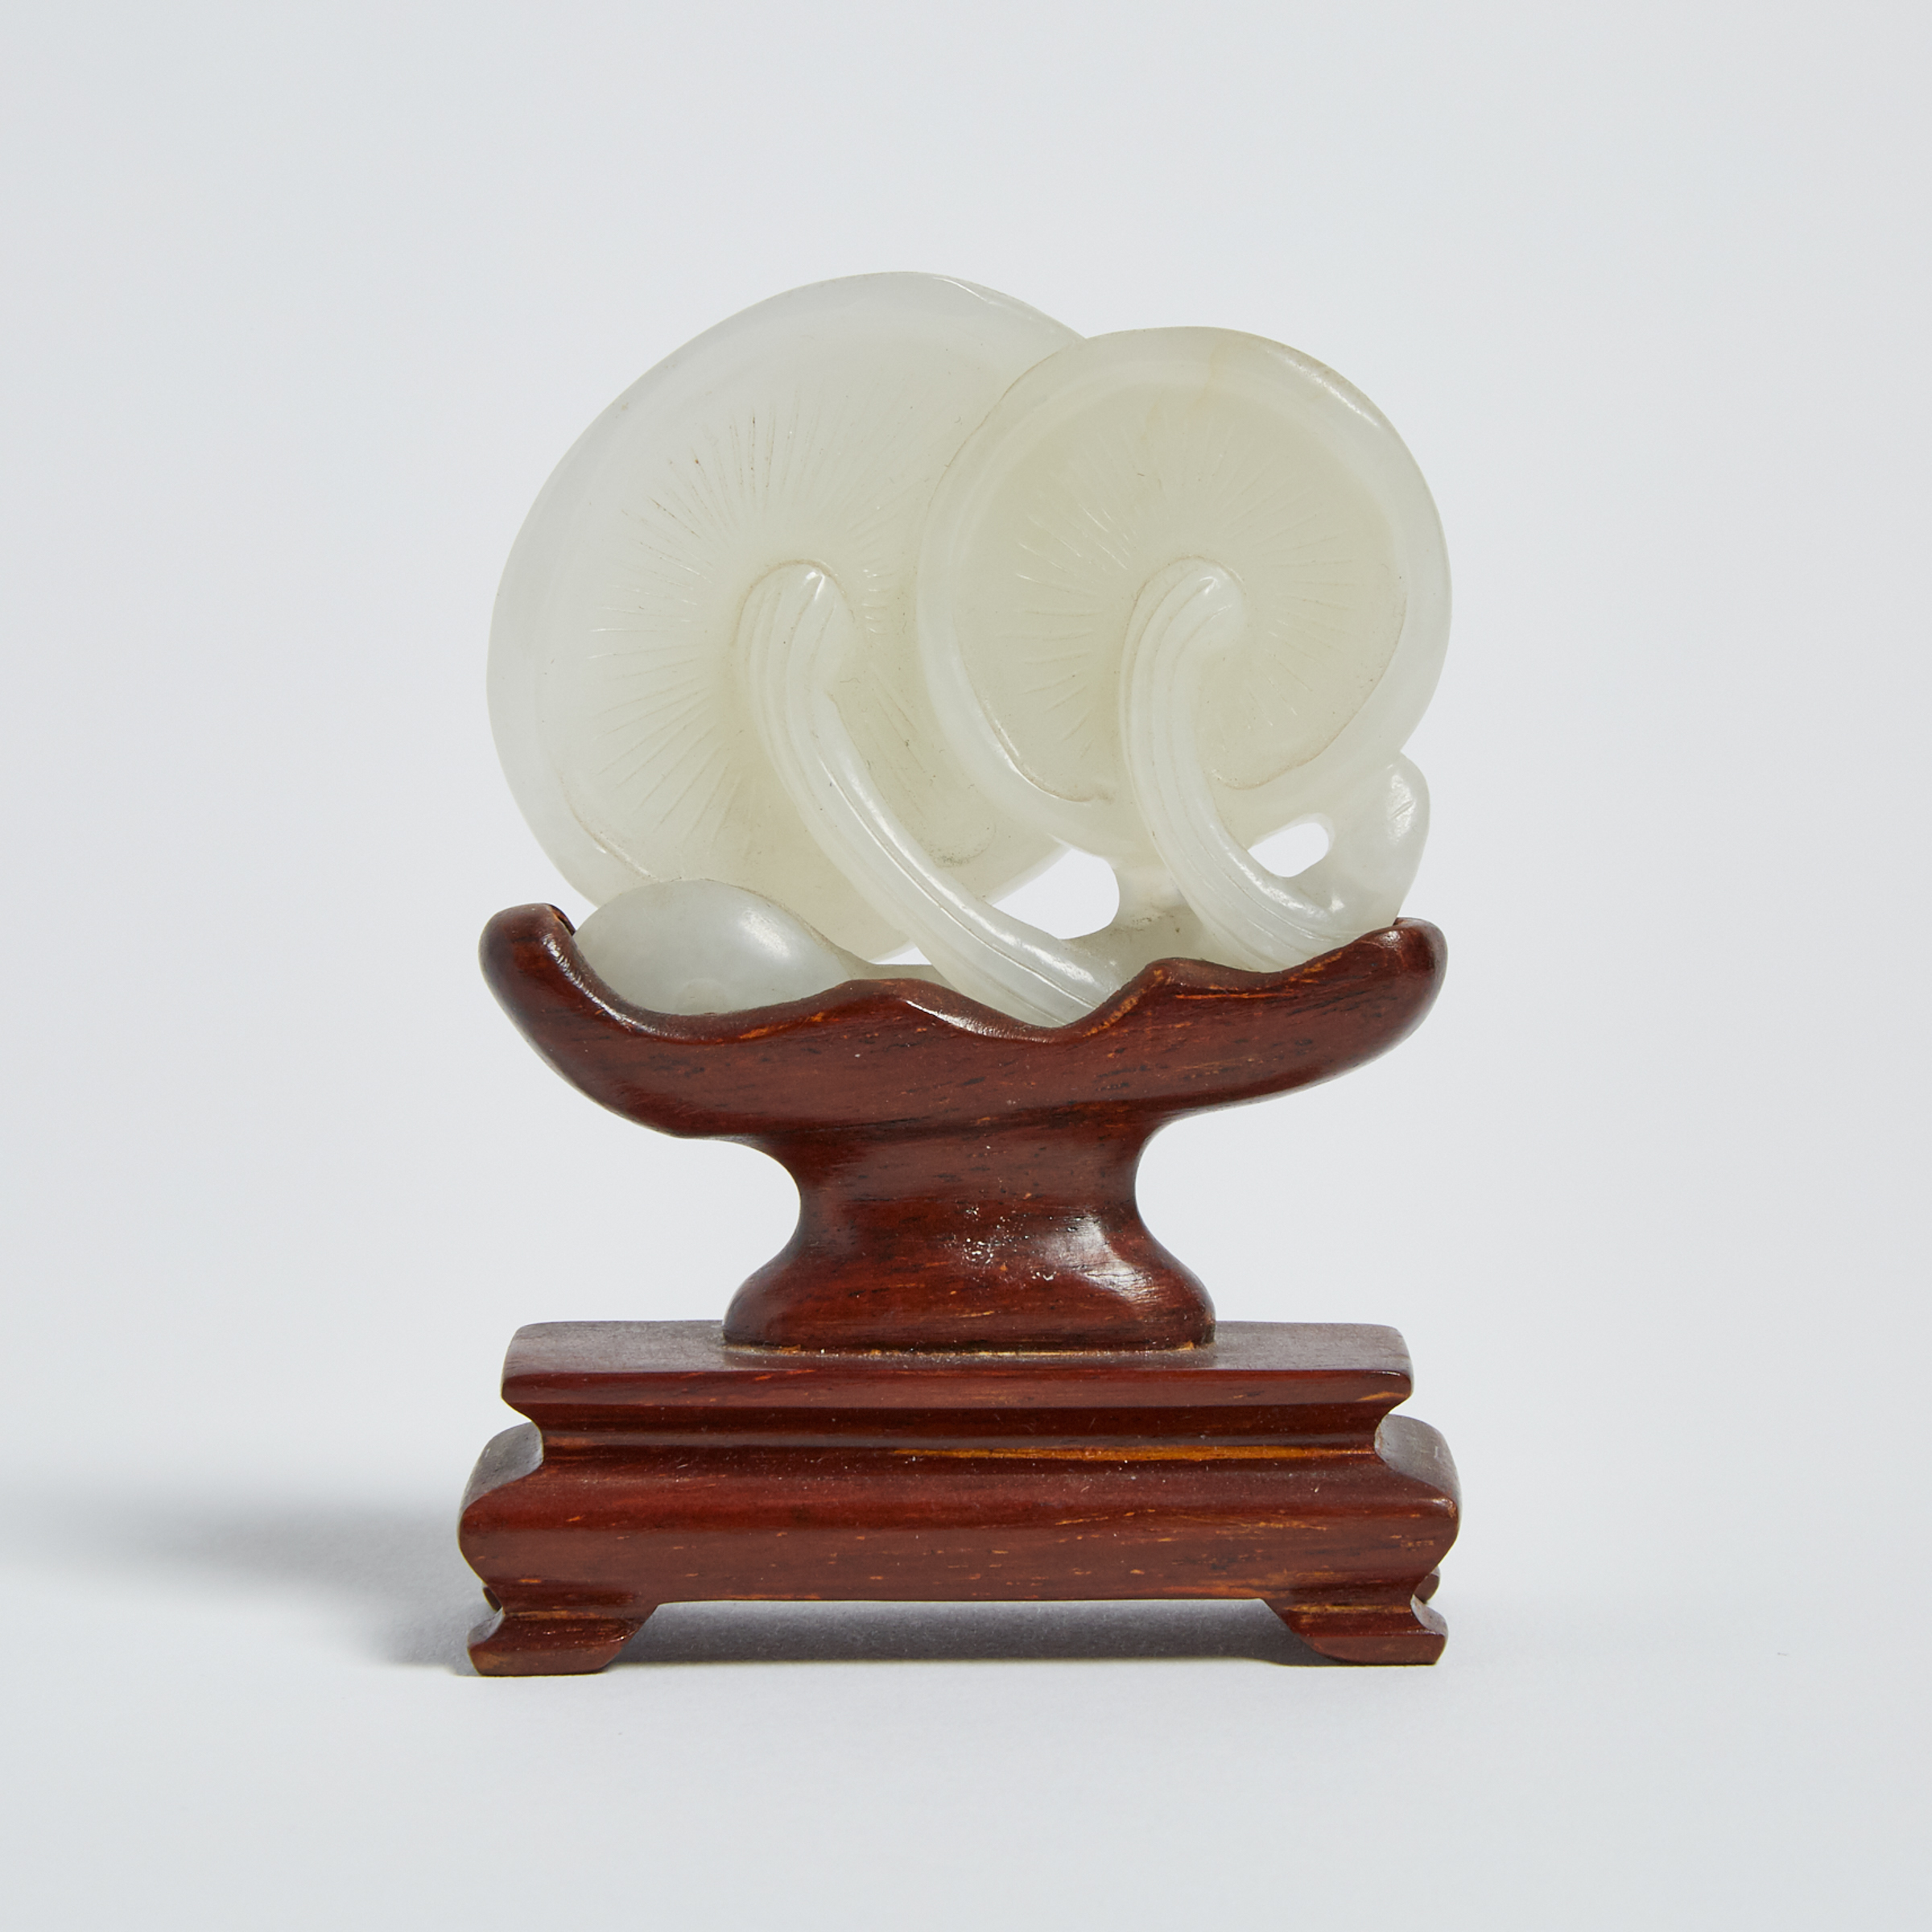 A White Jade Carving of Mushrooms